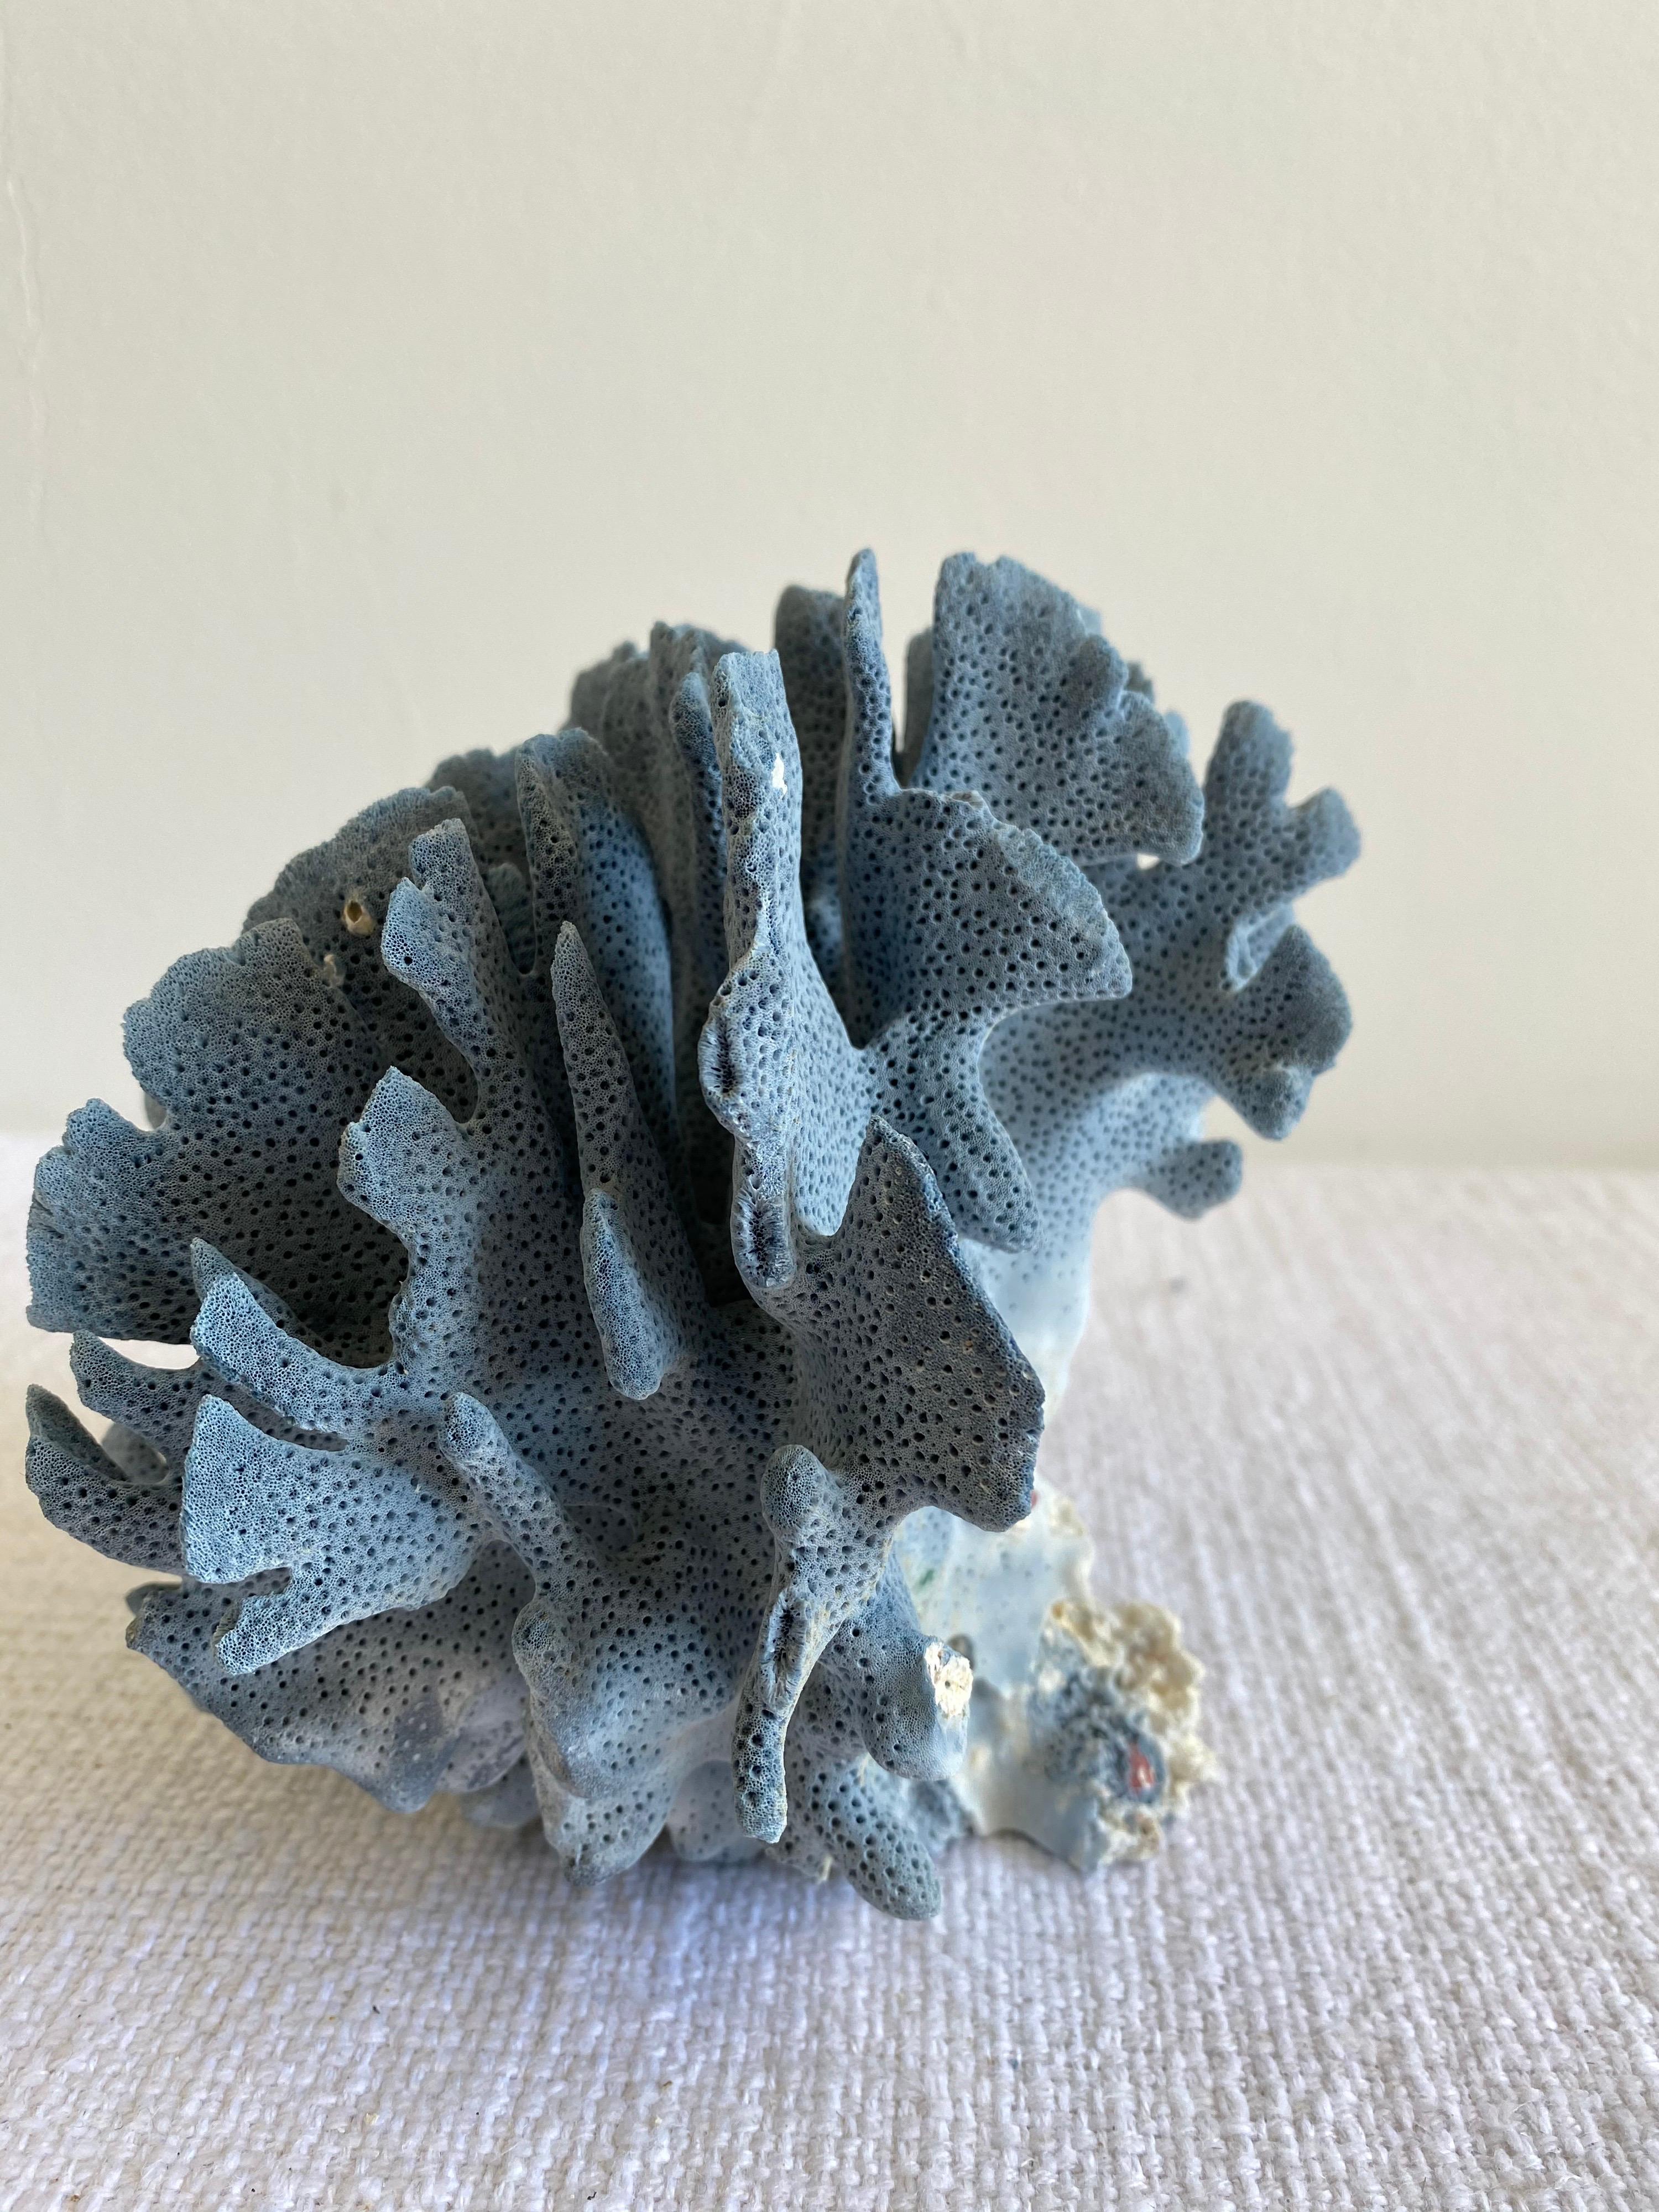 Beautiful natural colored blue coral.
This coral is real, not faux, and color is natural, not dyed.
Size: 7